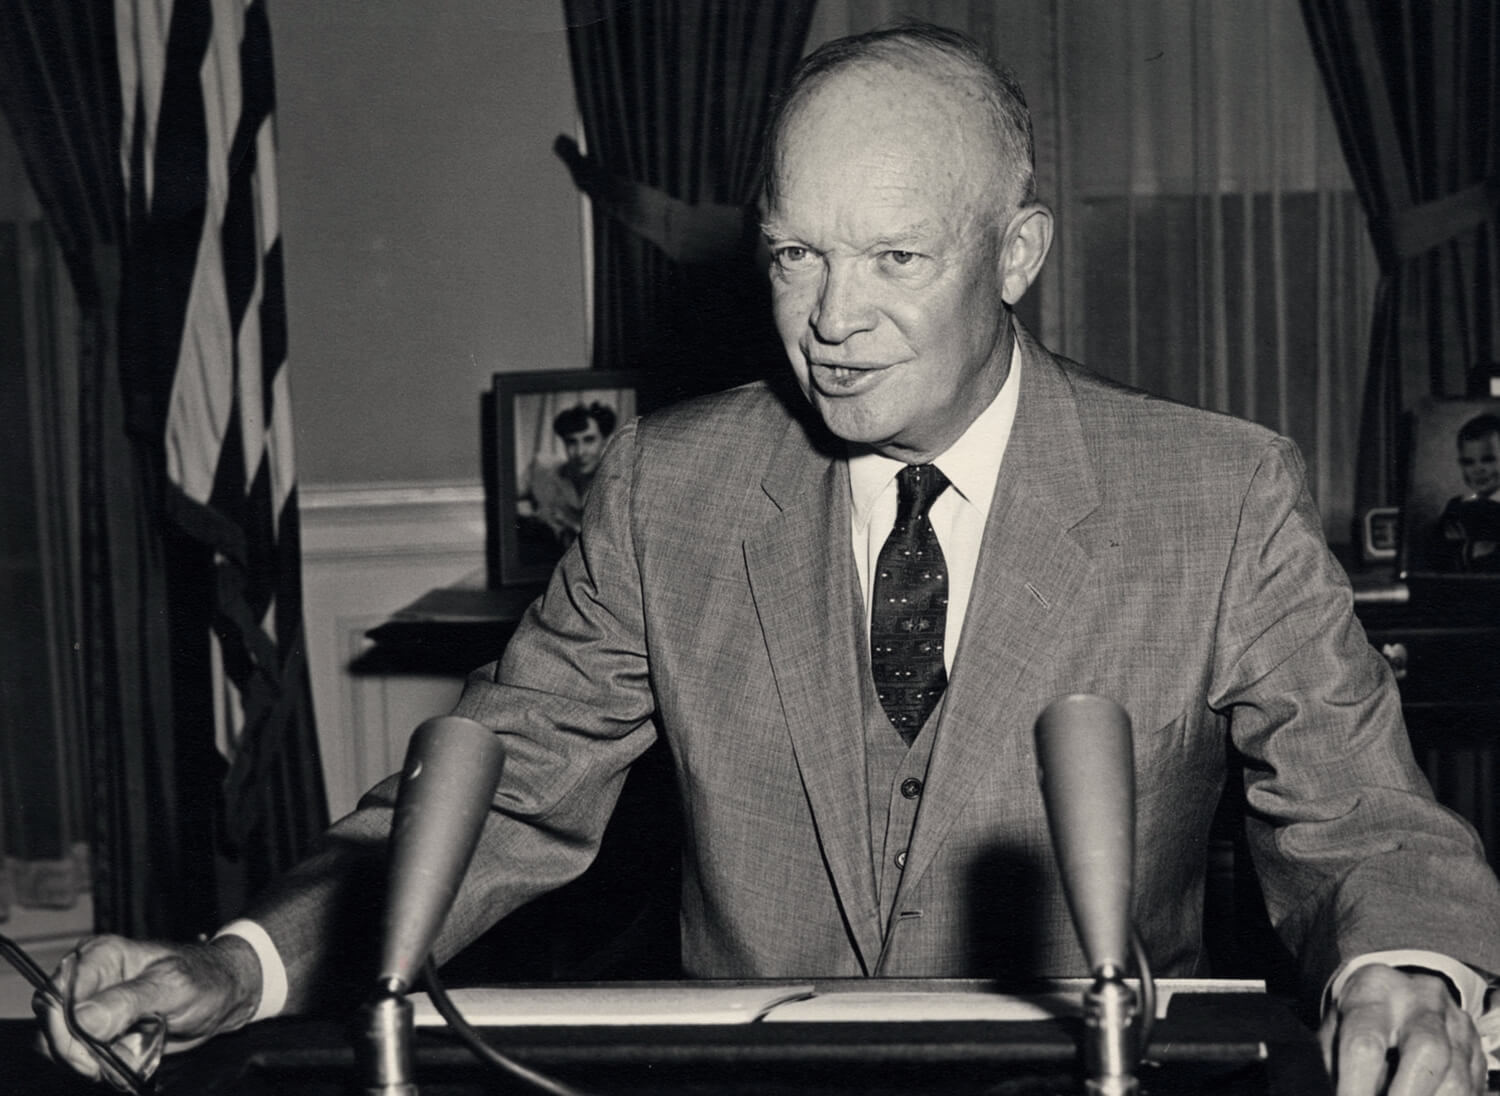 Photograph of President Dwight D. Eisenhower Delivering a Special Broadcast on the Little Rock Situation